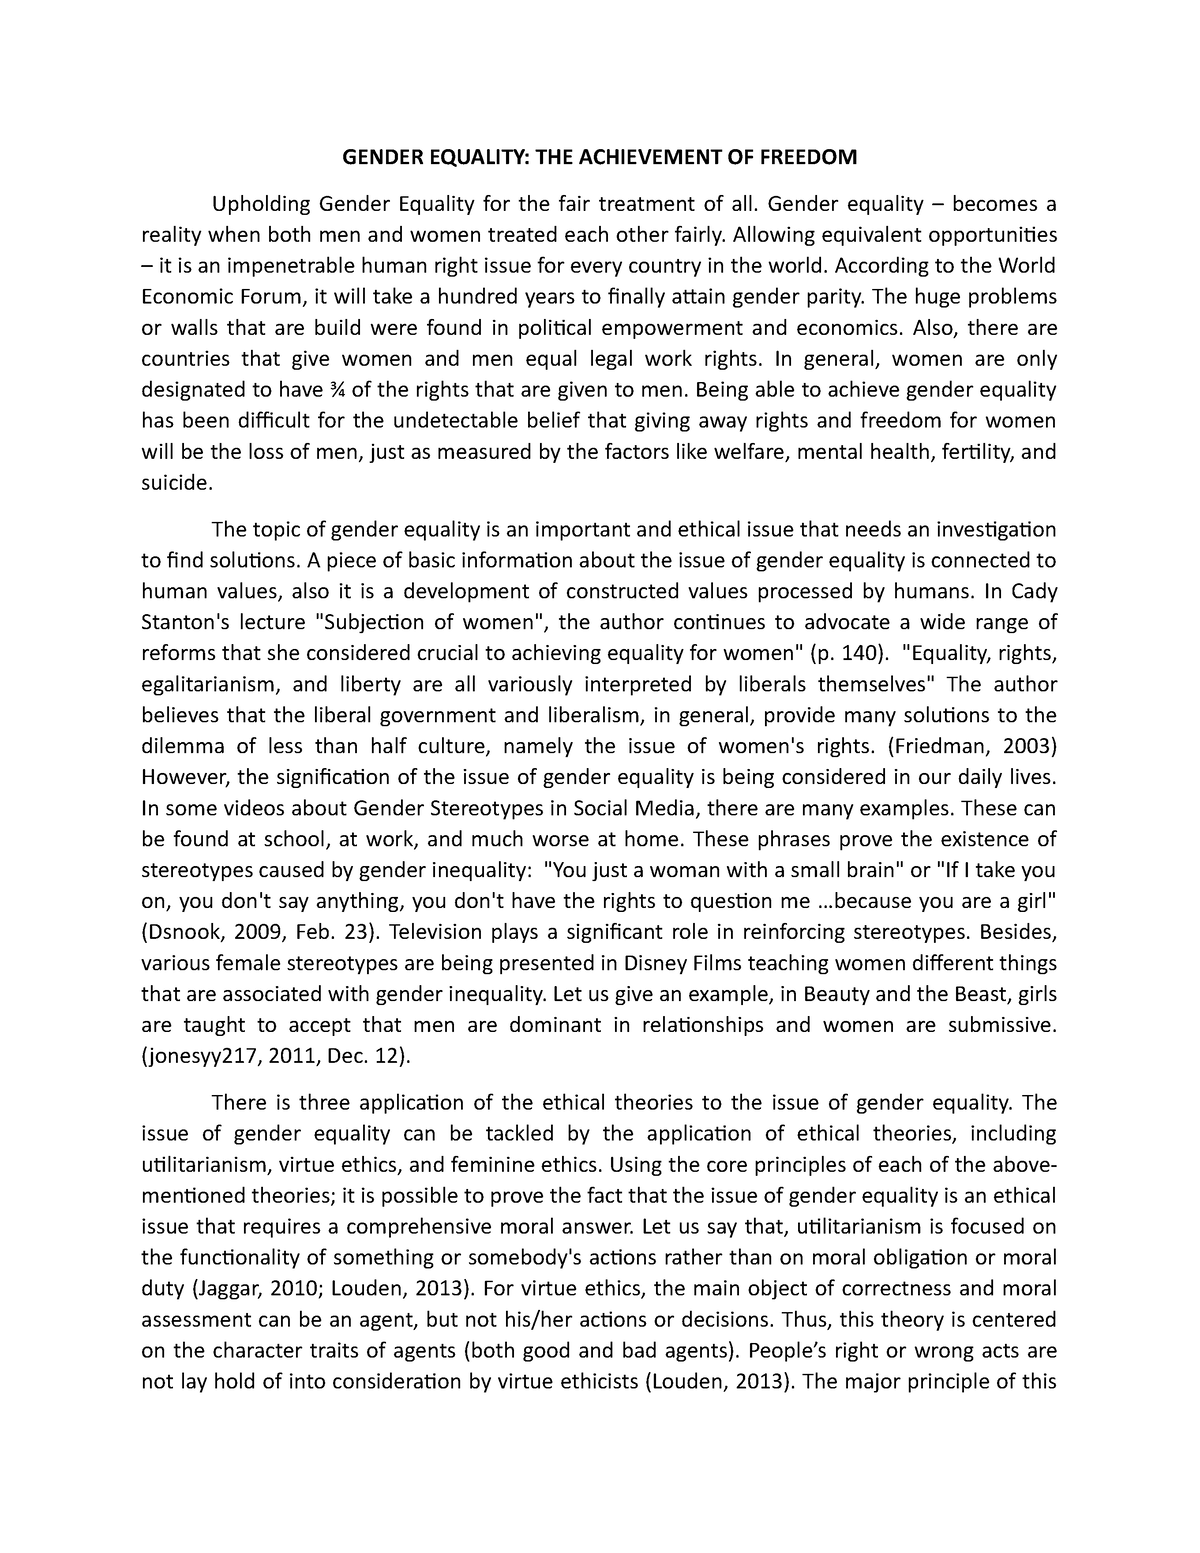 reflection essay about gender equality